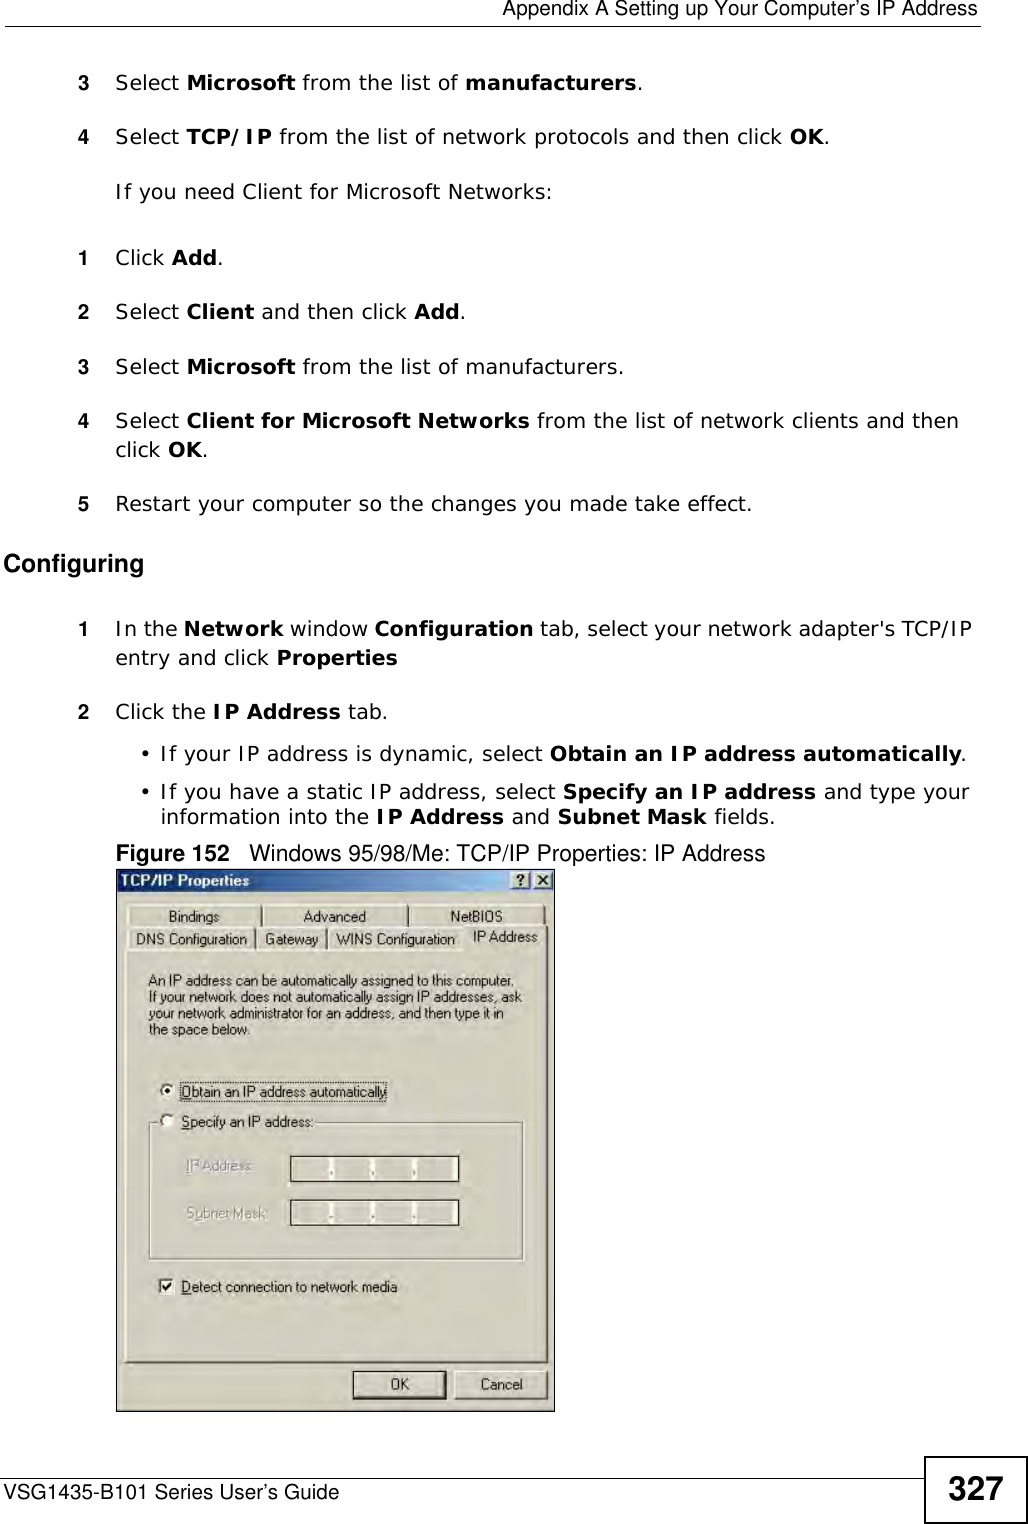  Appendix A Setting up Your Computer’s IP AddressVSG1435-B101 Series User’s Guide 3273Select Microsoft from the list of manufacturers.4Select TCP/IP from the list of network protocols and then click OK.If you need Client for Microsoft Networks:1Click Add.2Select Client and then click Add.3Select Microsoft from the list of manufacturers.4Select Client for Microsoft Networks from the list of network clients and then click OK.5Restart your computer so the changes you made take effect.Configuring 1In the Network window Configuration tab, select your network adapter&apos;s TCP/IP entry and click Properties2Click the IP Address tab.• If your IP address is dynamic, select Obtain an IP address automatically. • If you have a static IP address, select Specify an IP address and type your information into the IP Address and Subnet Mask fields.Figure 152   Windows 95/98/Me: TCP/IP Properties: IP Address